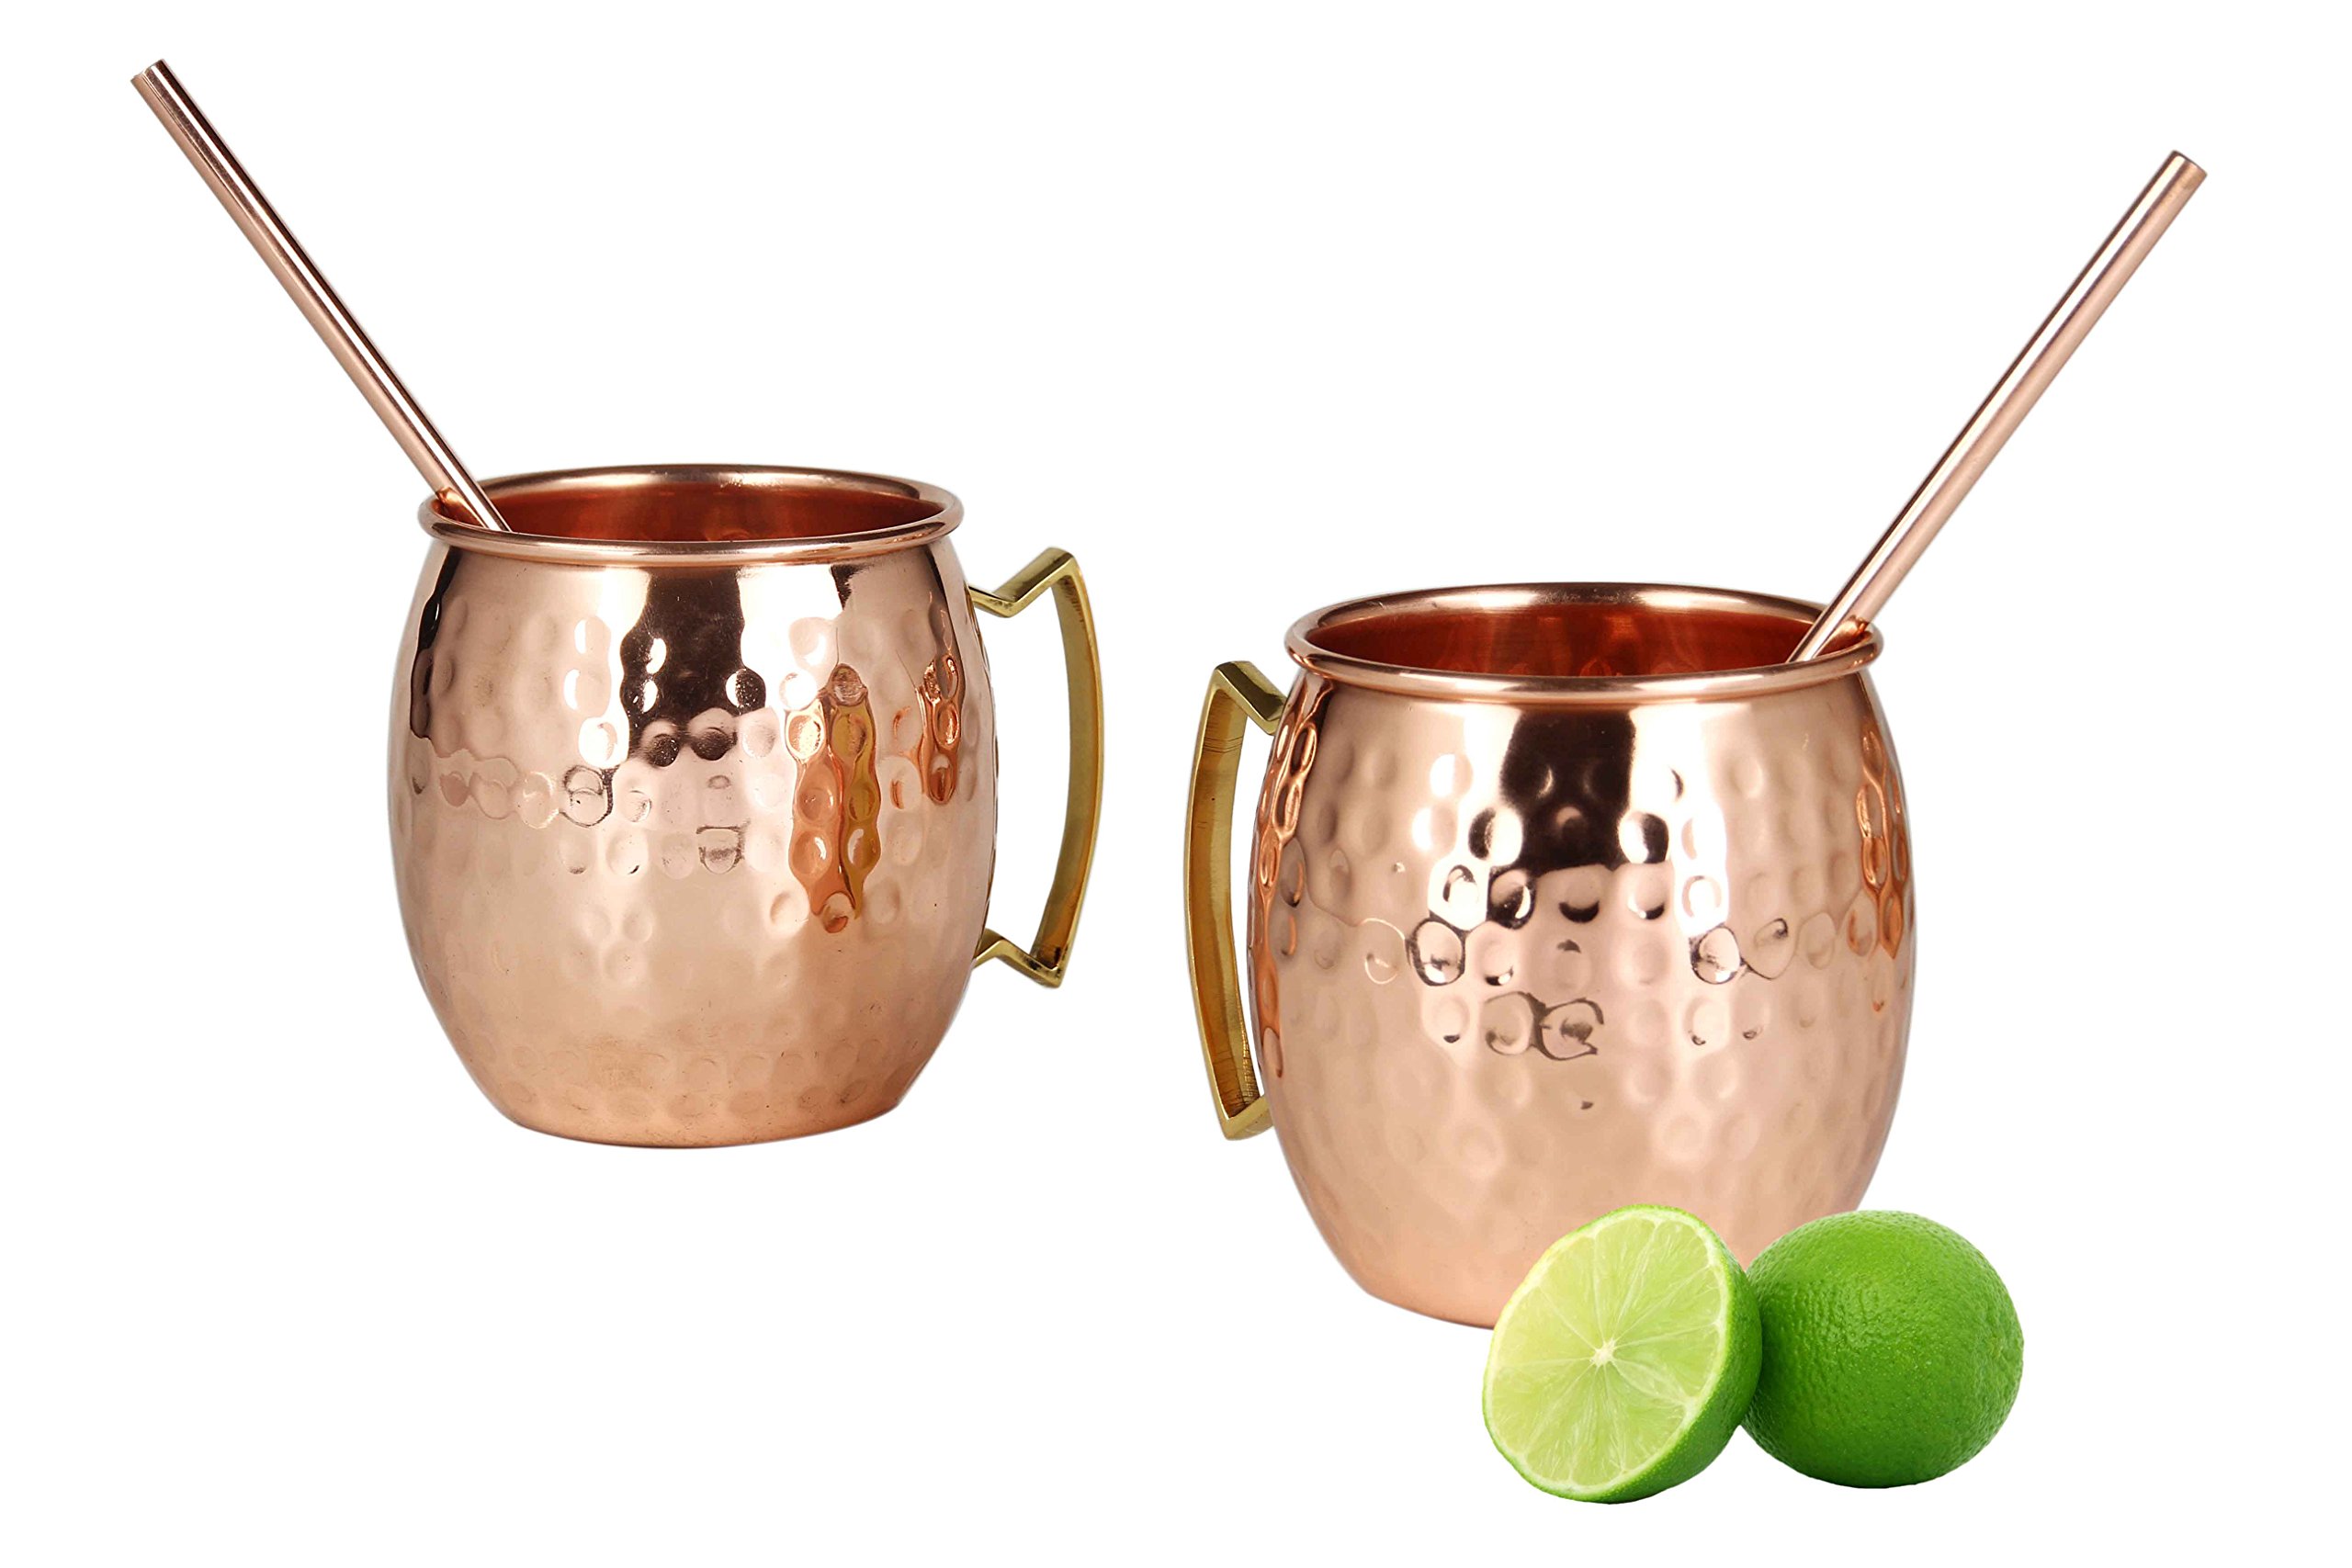 COPPER BAR COCKTAILS 29 Moscow Mule 100% Solid Pure Copper Mug/Cup (16-Ounce/Set of 2, Hammered)